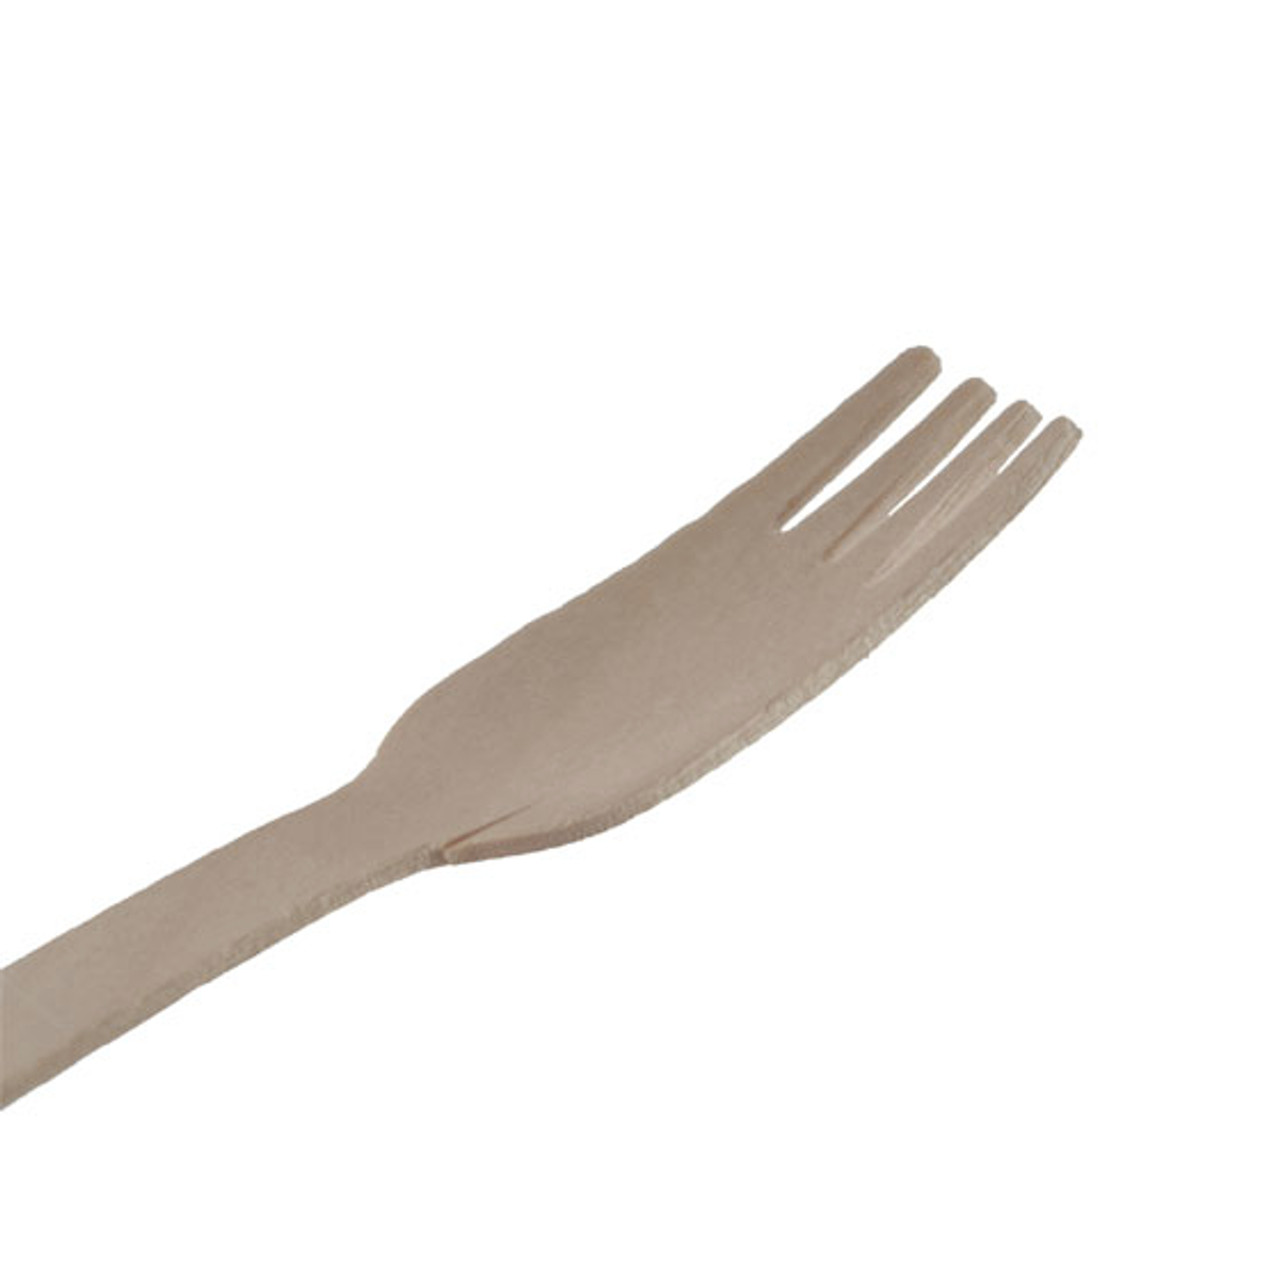 Disposable Birchwood Wooden Cutlery Sets - 16cm ( 6" ) Length Eco Friendly Biodegradable Compostable Wooden Wooden Cutlery - ideal for your Parties